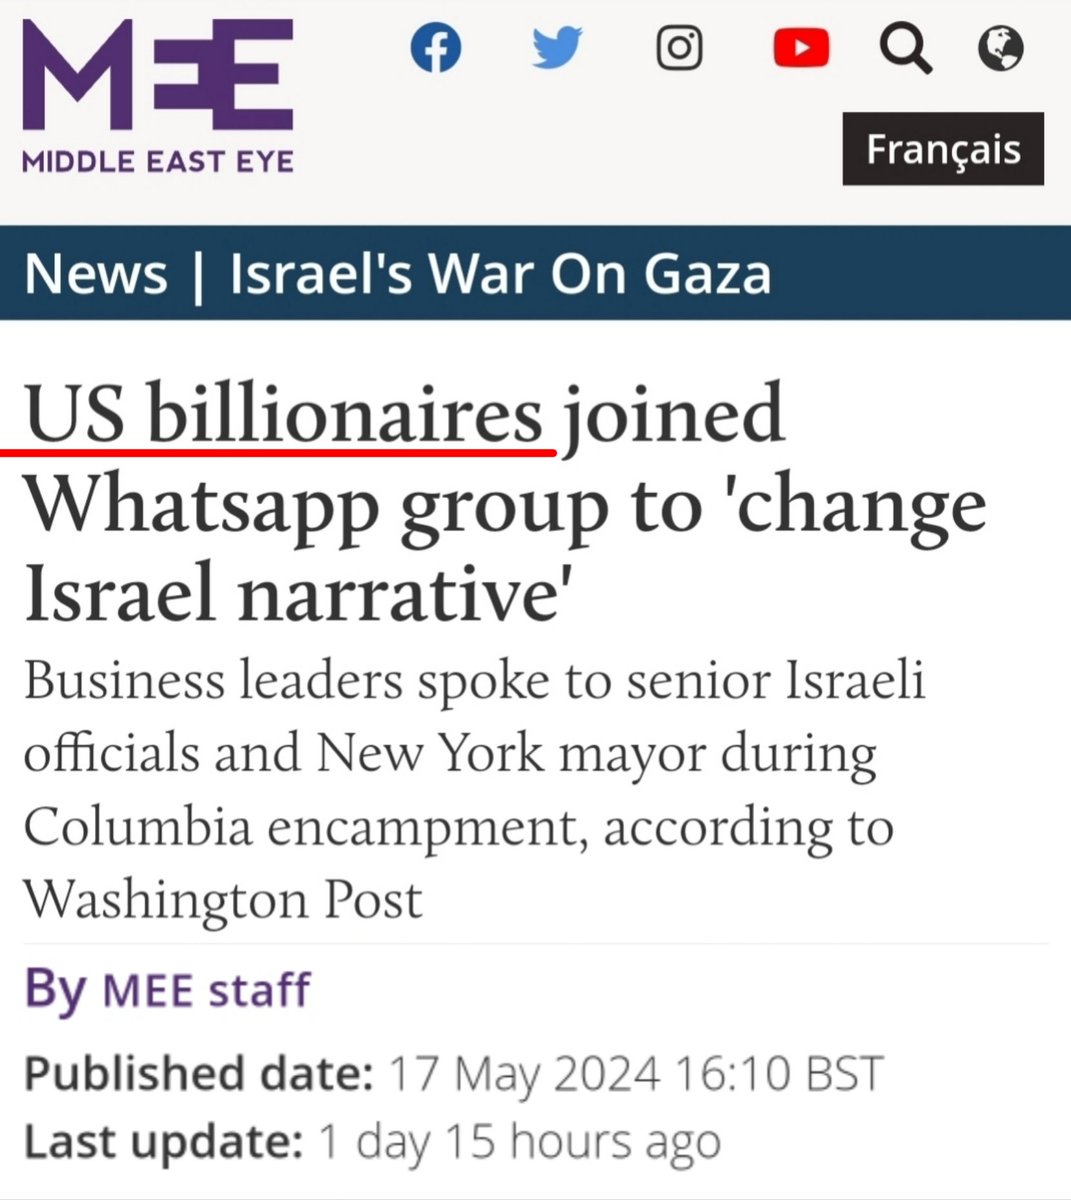 🚨🇮🇱 🇺🇸BREAKING BOMBSHELL: JEWISH TREACHERY IN 3 PARTS

1st, The Sanitized Headlines:
WAPO: 'Some Wealthy Americans' (They are $Billionaires)
MEE: 'US Billionaires' (they're ALL jews with loyalty to Israel) 

2nd, Who They Are & What They Did:
Jewish Billionaires & other jewish